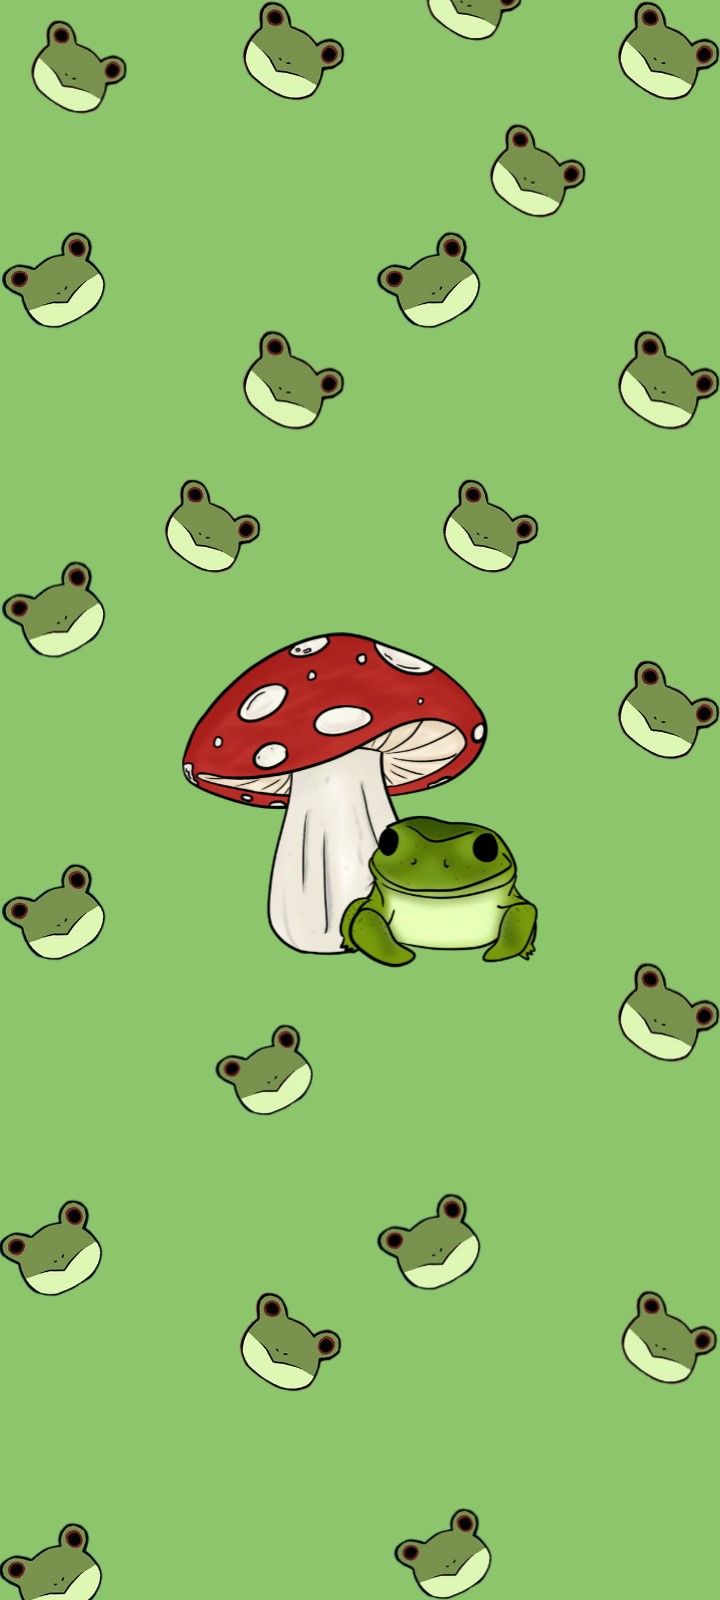 Frongs Ideas In Frog Art Cute Frogs Pictures